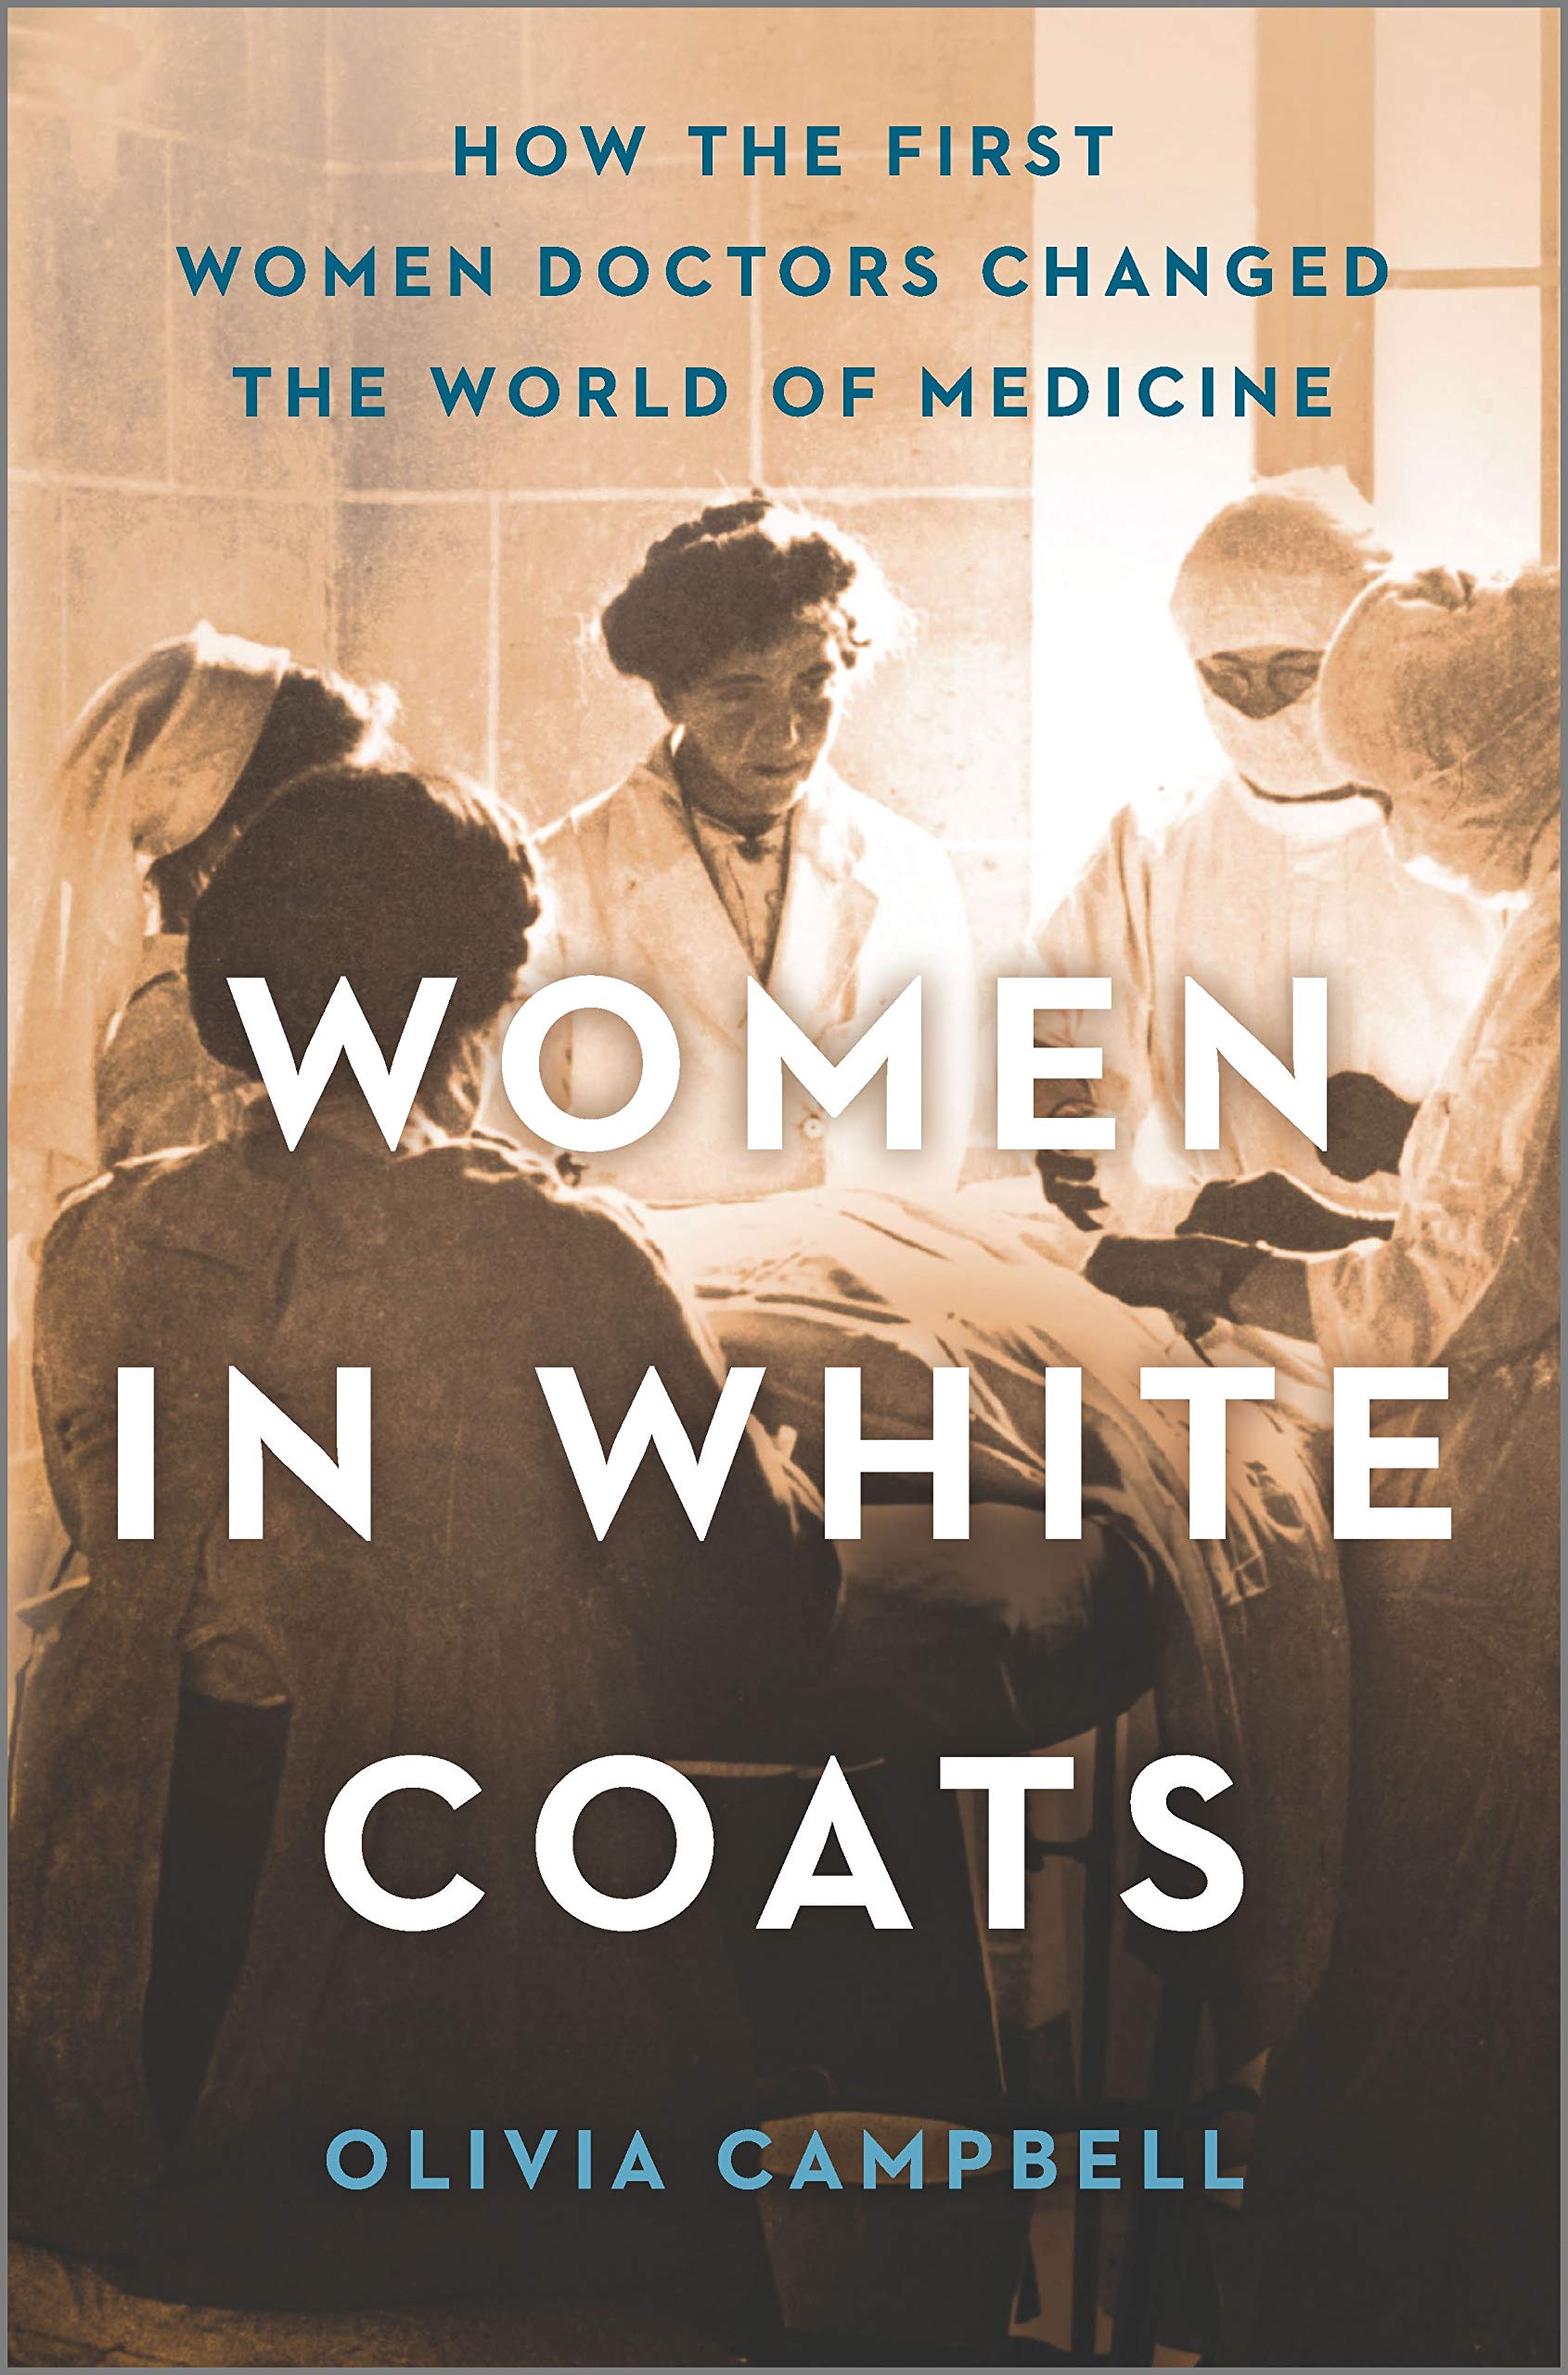 Image for "Women in White Coats"